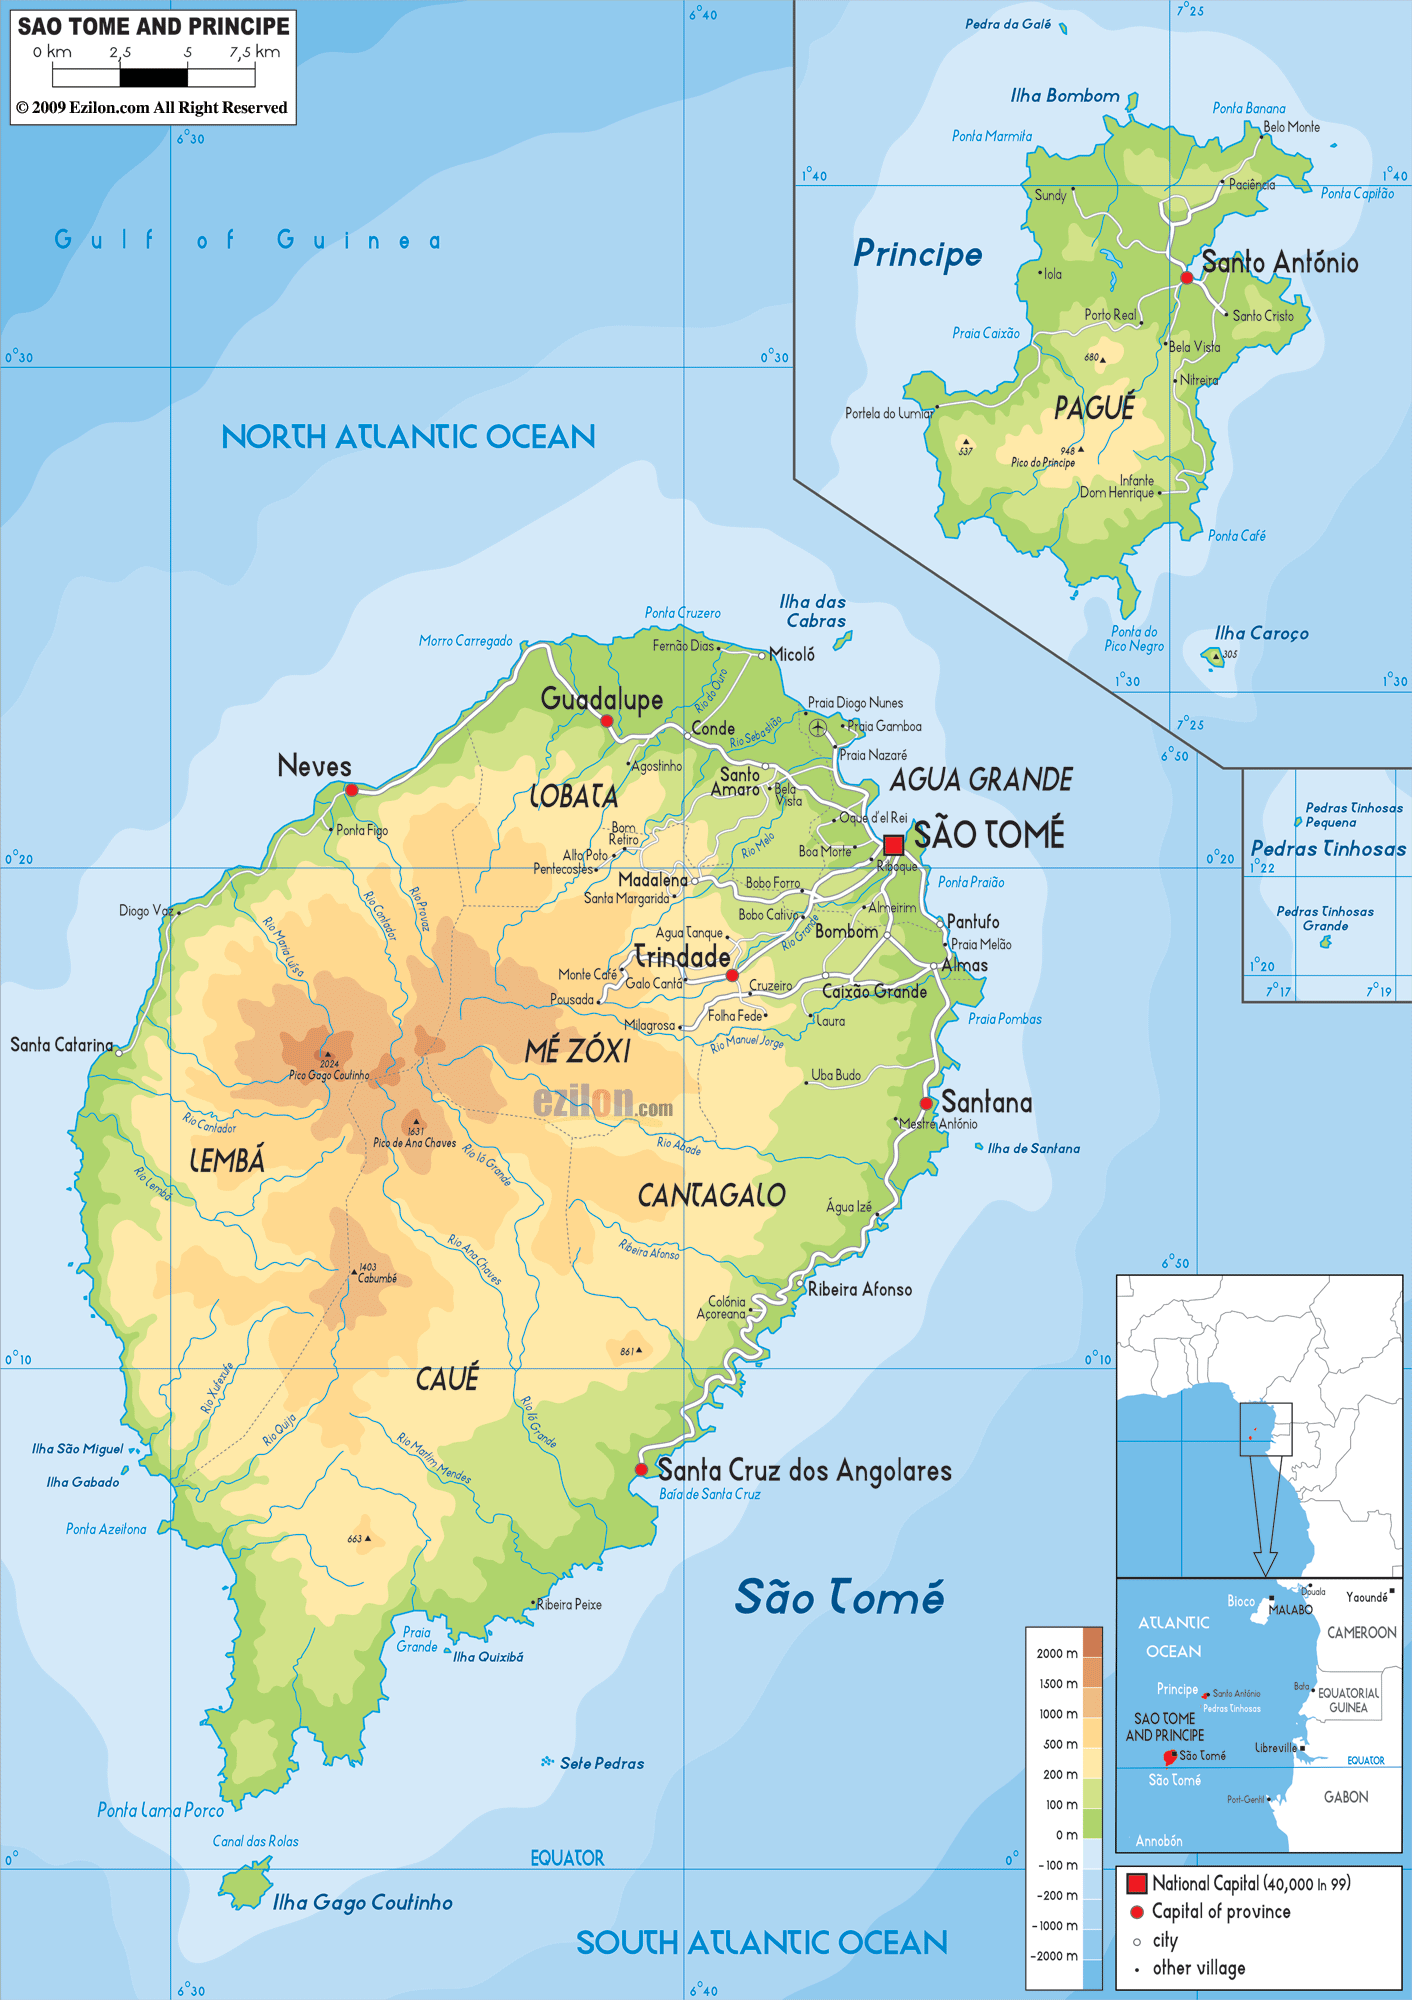 Map of So Tom and Principe and Sao Tomeans Physical Map